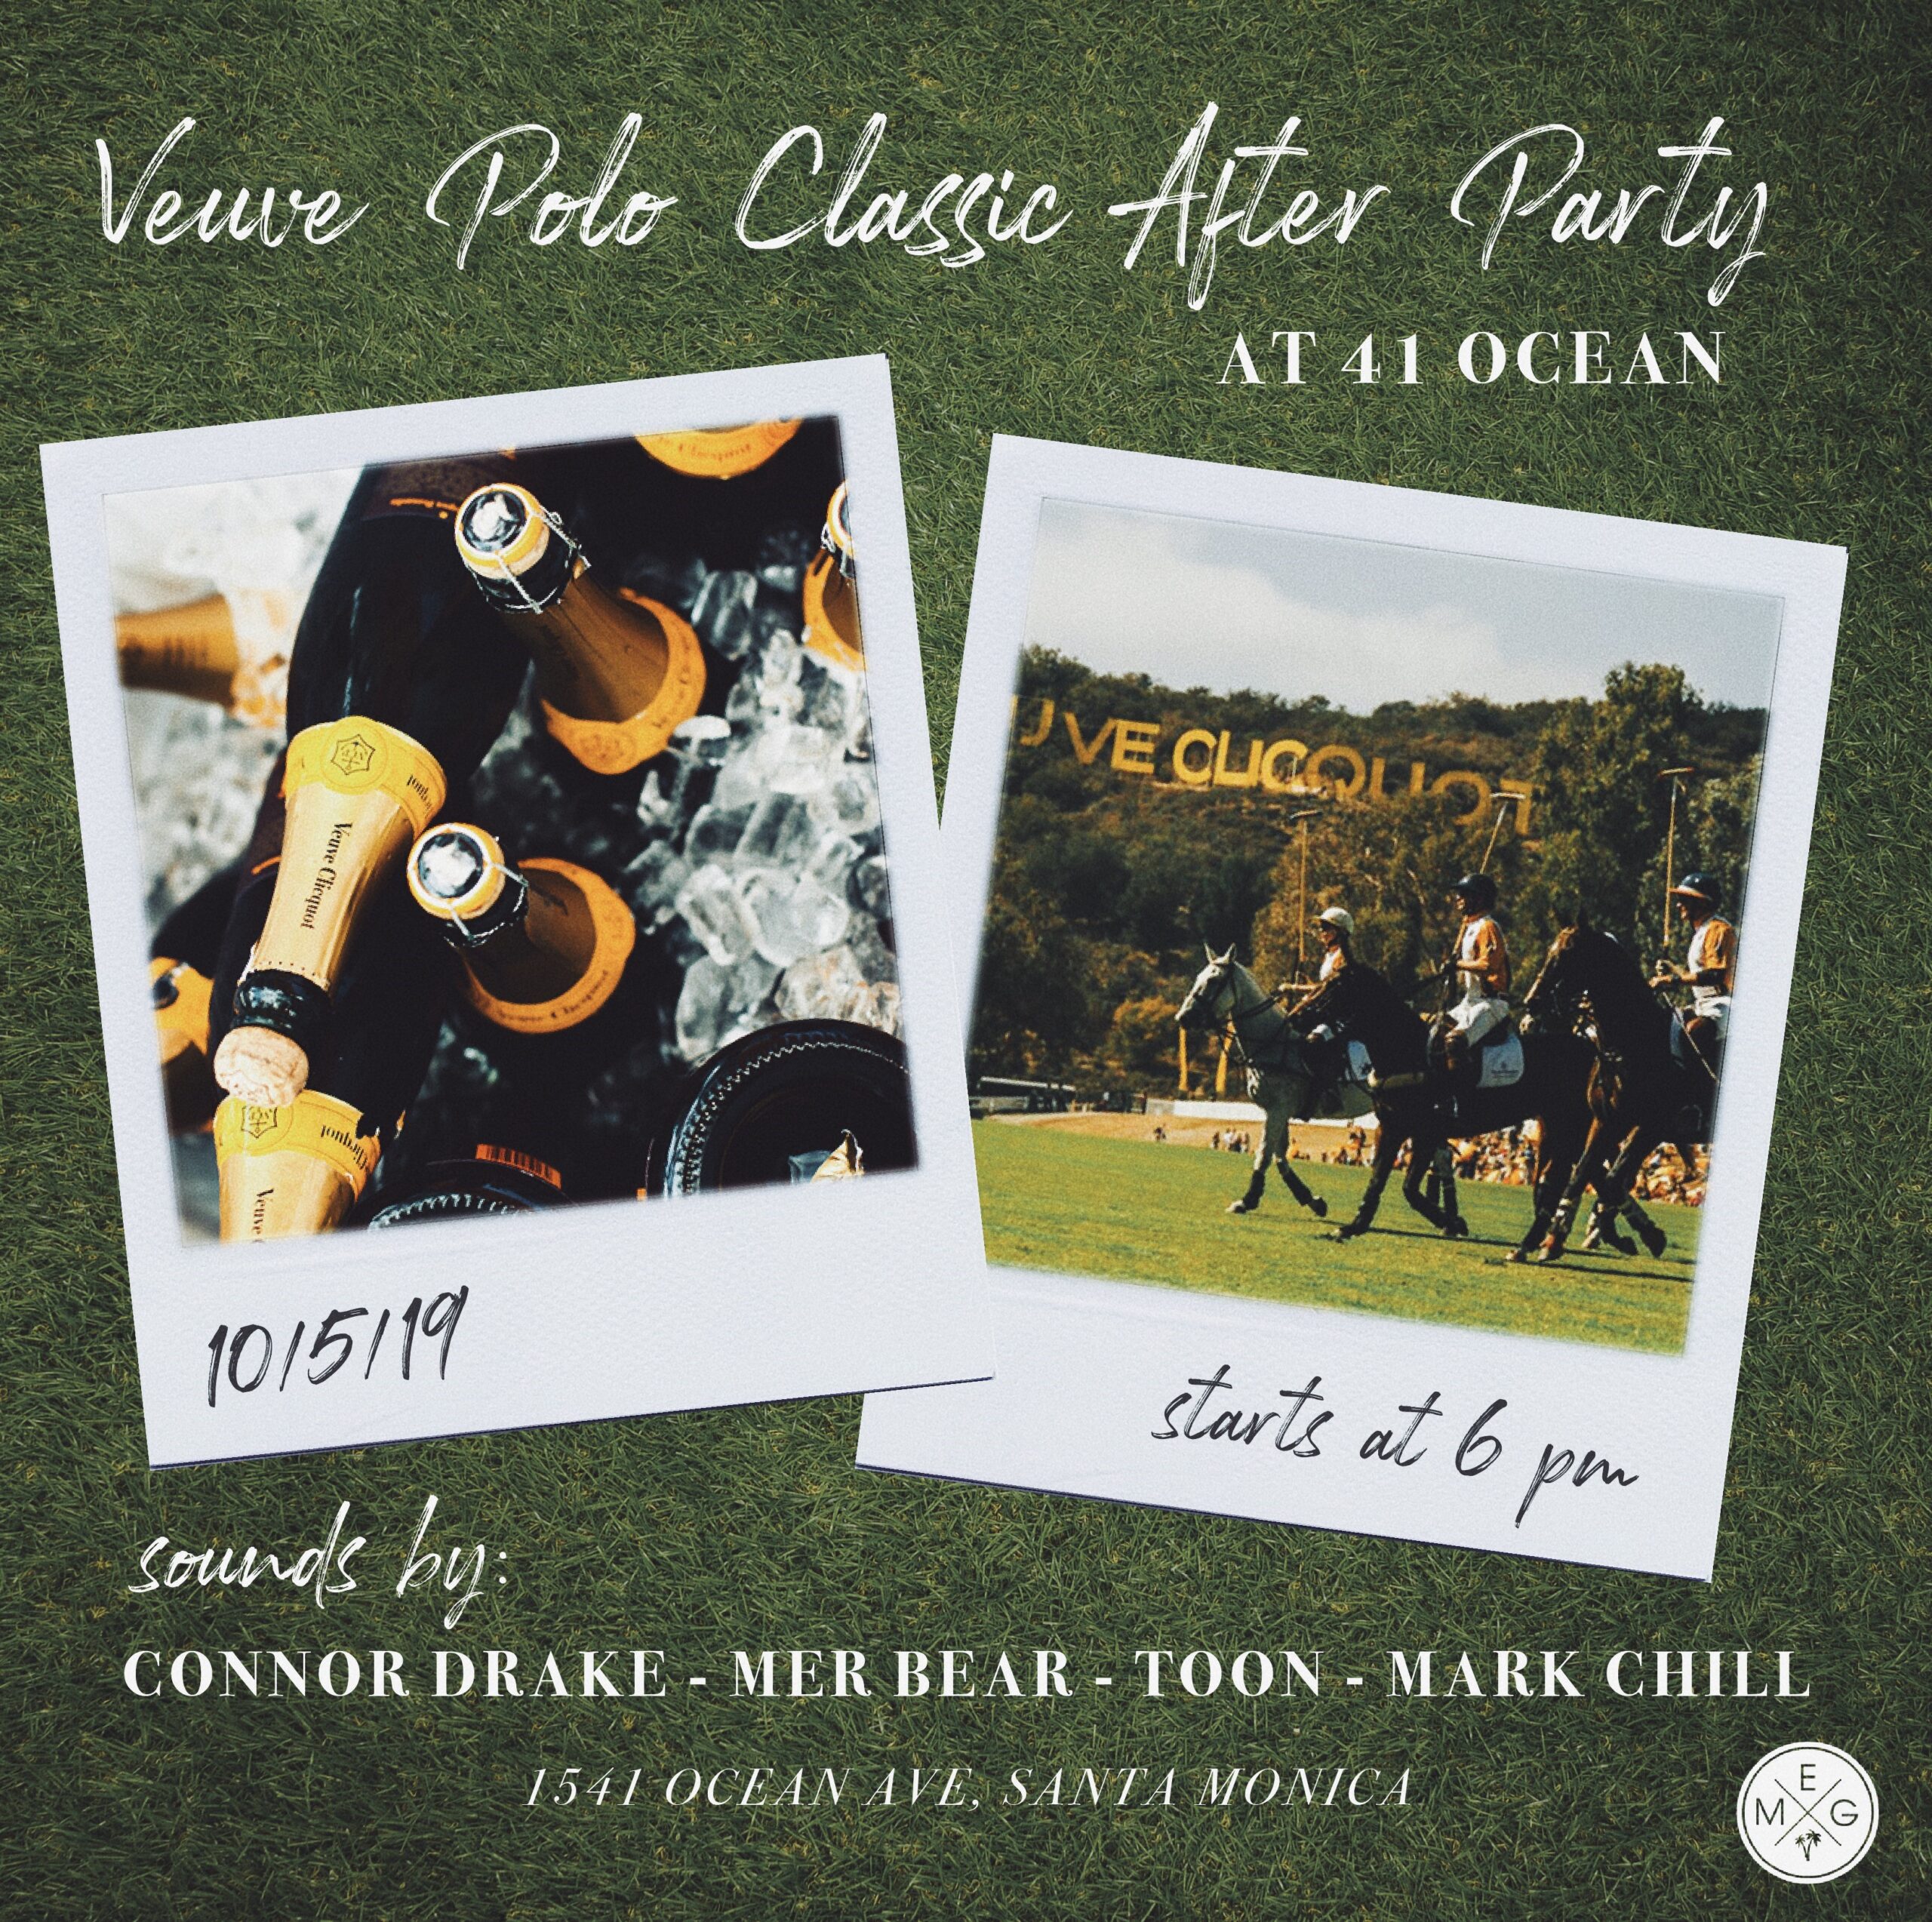 Veuve Polo Classic After Party